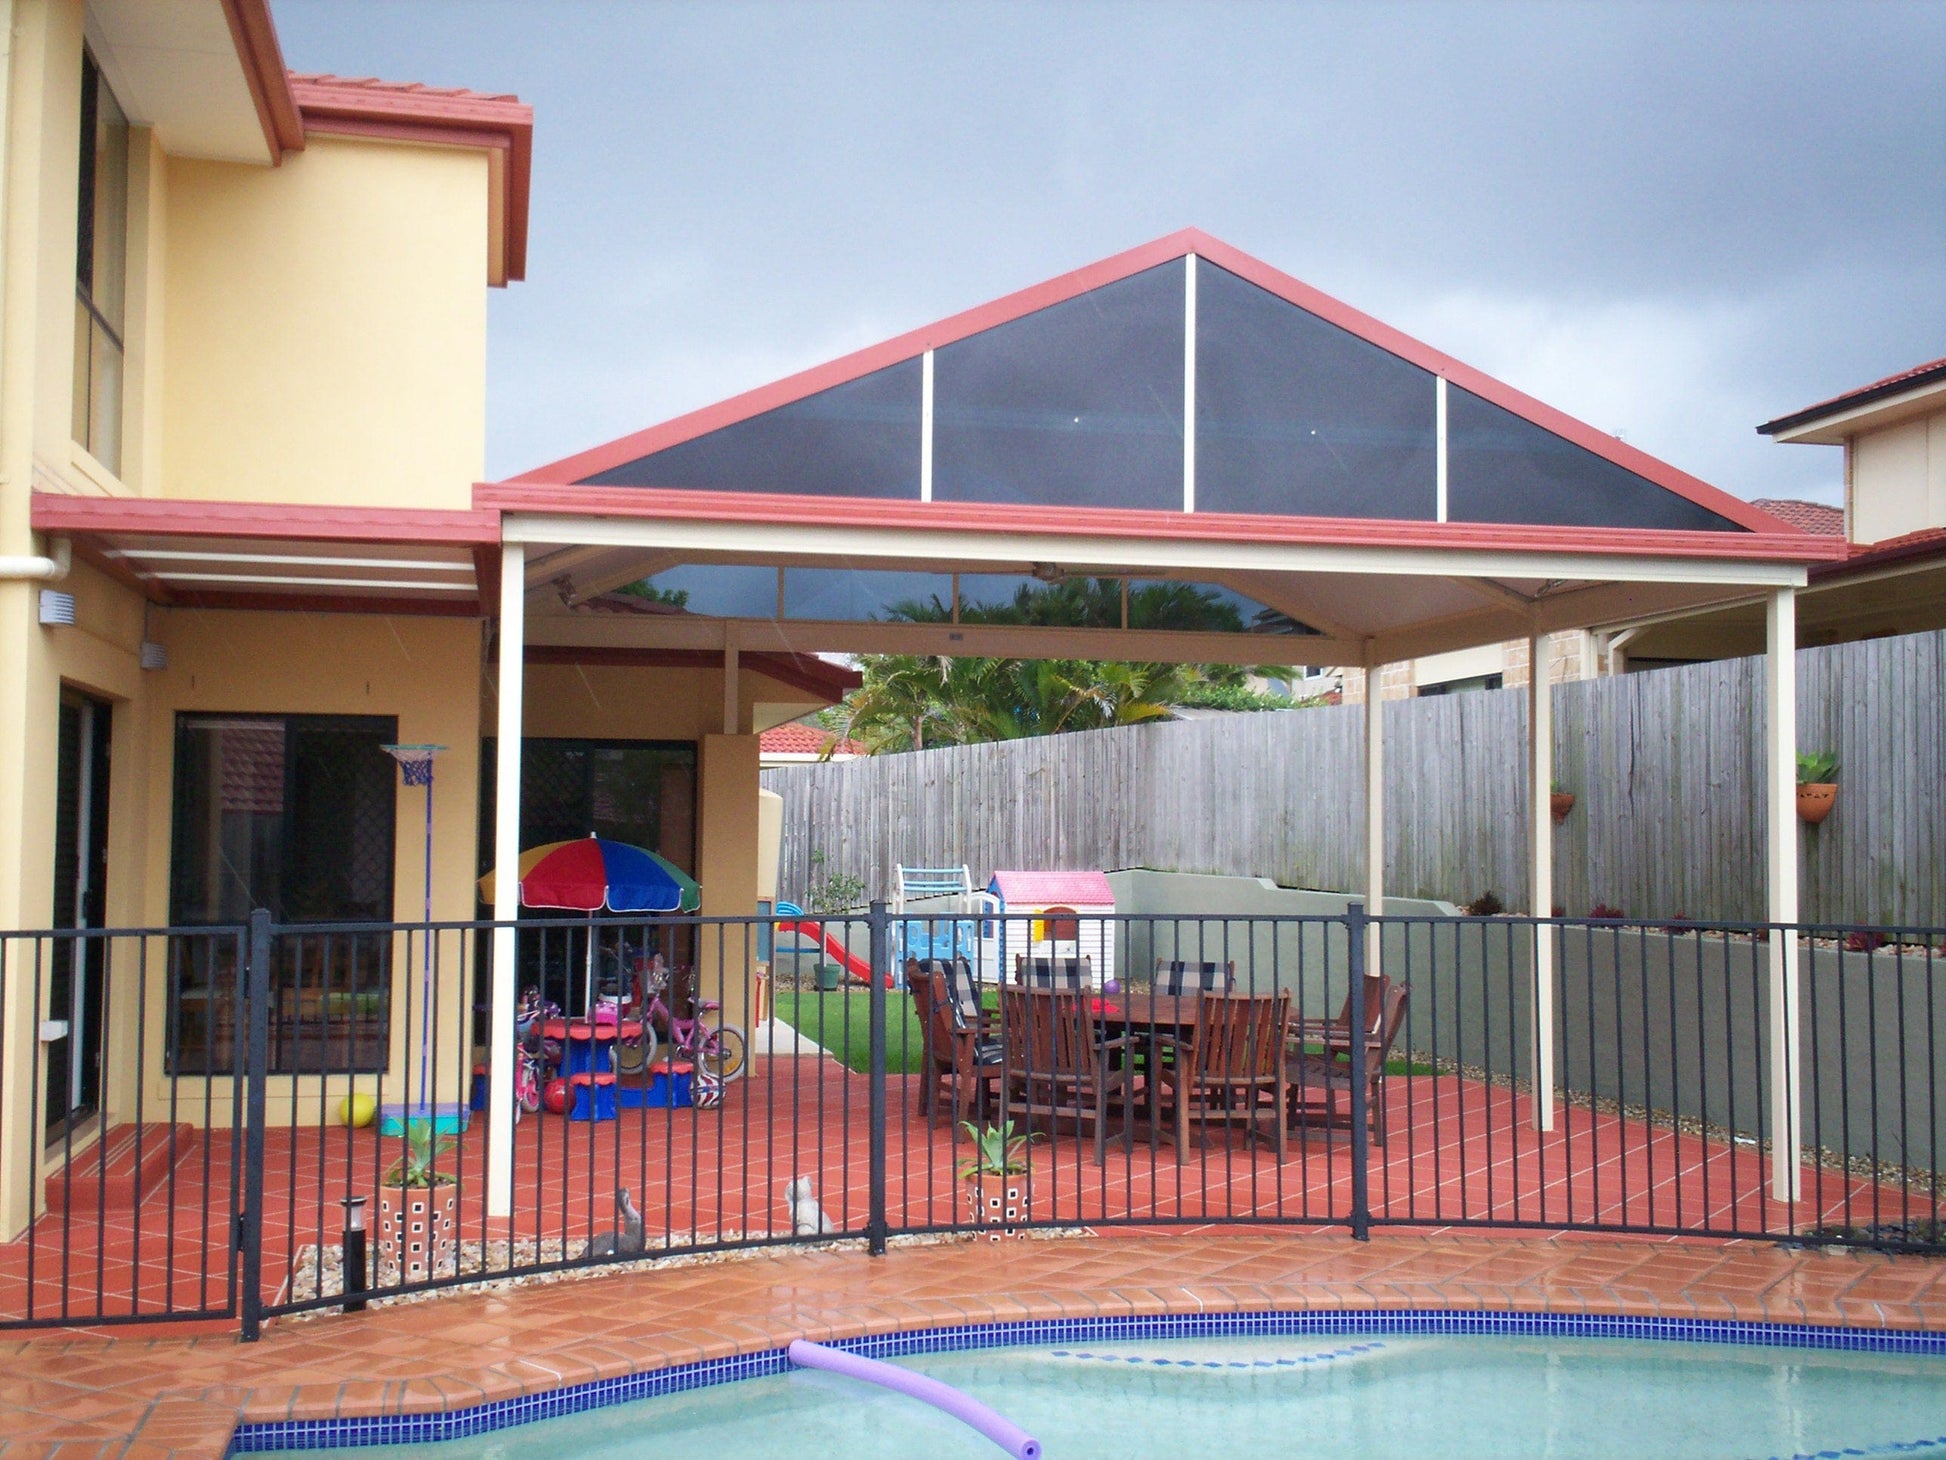 Non-Insulated Gable Patio - 6m x 5m- Supply & Install QHI National